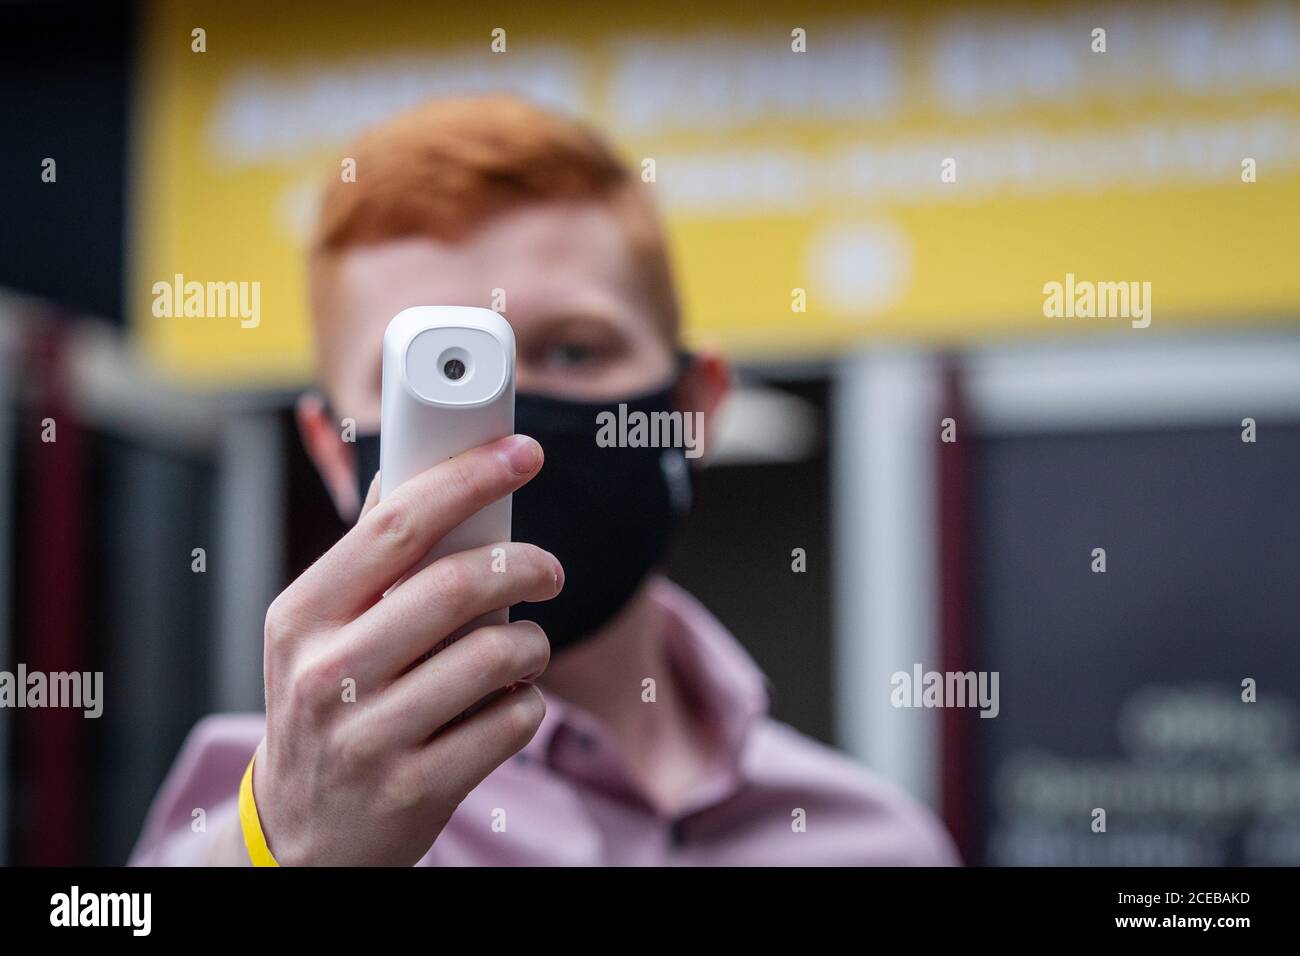 Forehead non-contact thermometer being used to check body temperature as people enter sports stadium during Coronavirus pandemic in UK Stock Photo